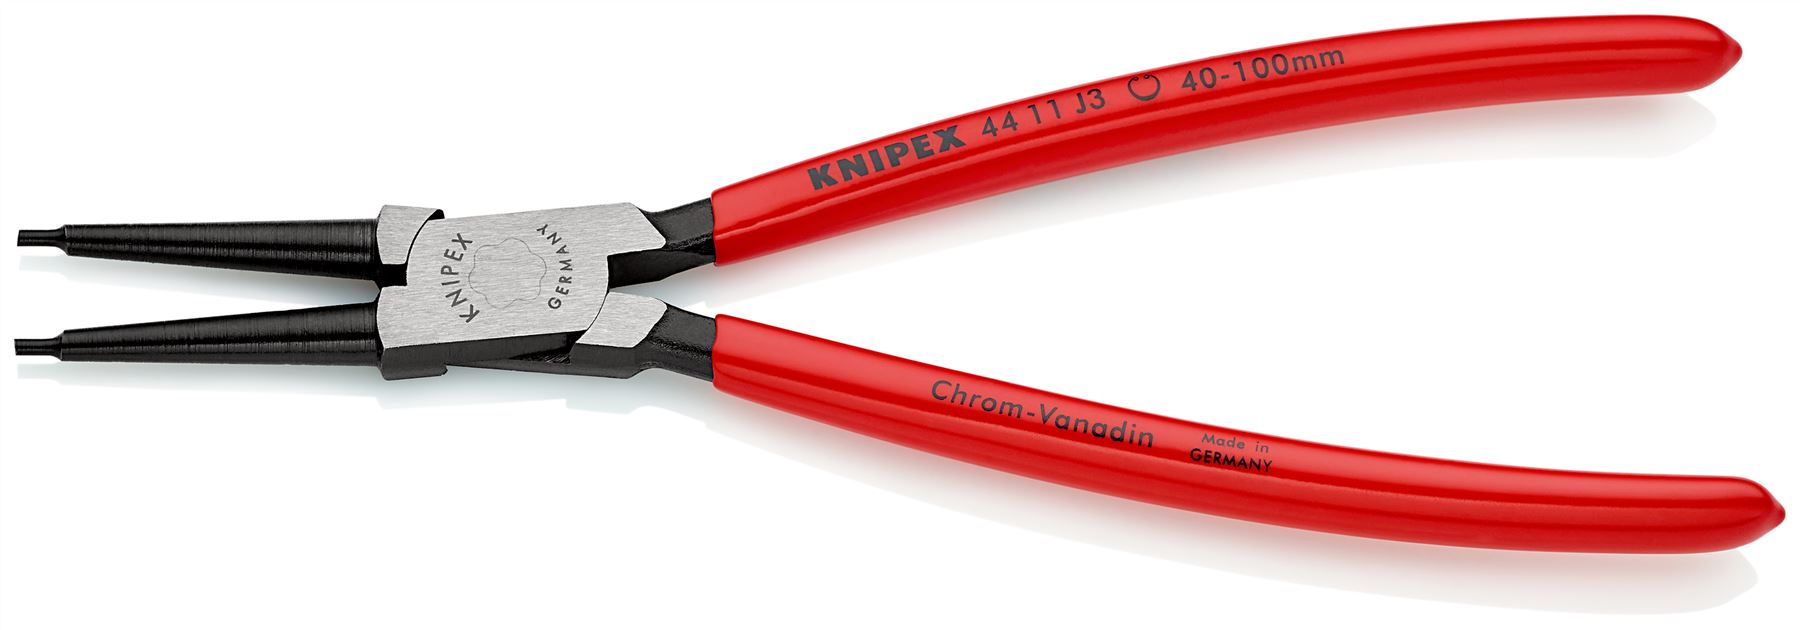 KNIPEX Circlip Pliers for Internal Circlips in Bore Holes 225mm 2.3mm Diameter Tips 44 11 J3 SB